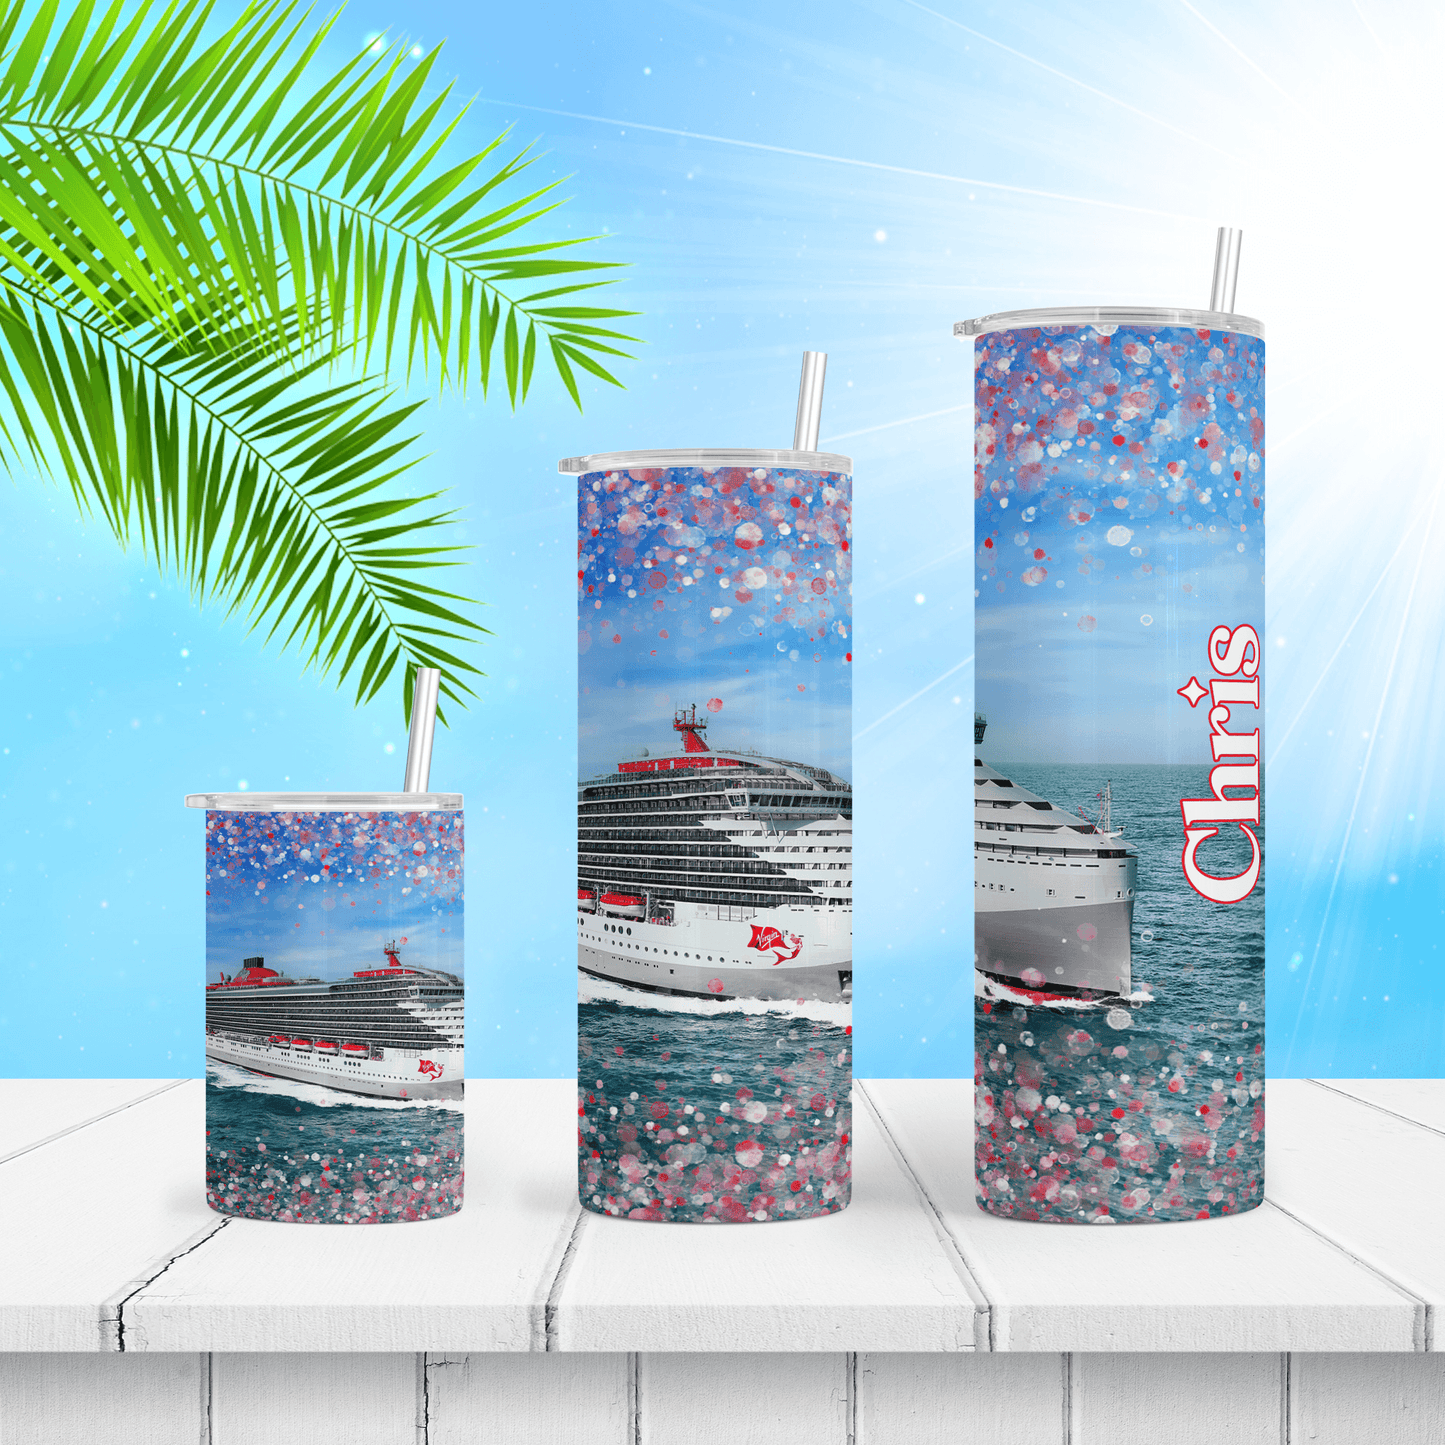 Virgin Voyages Cruise Personalized Tumbler Cup - Two Crafty Gays